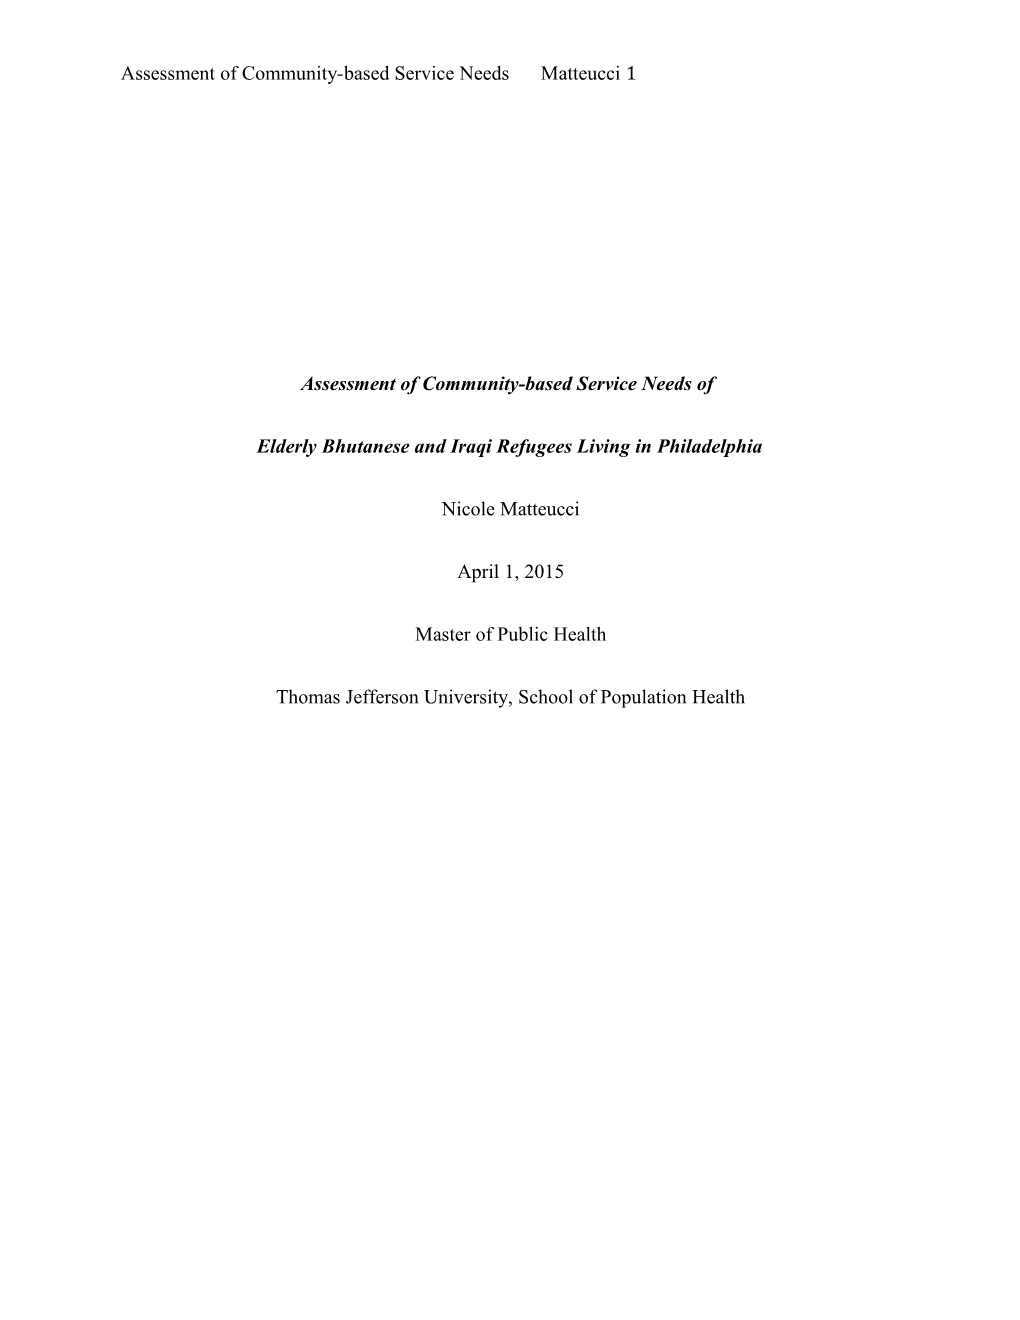 Assessment of Community-Based Service Needs Of